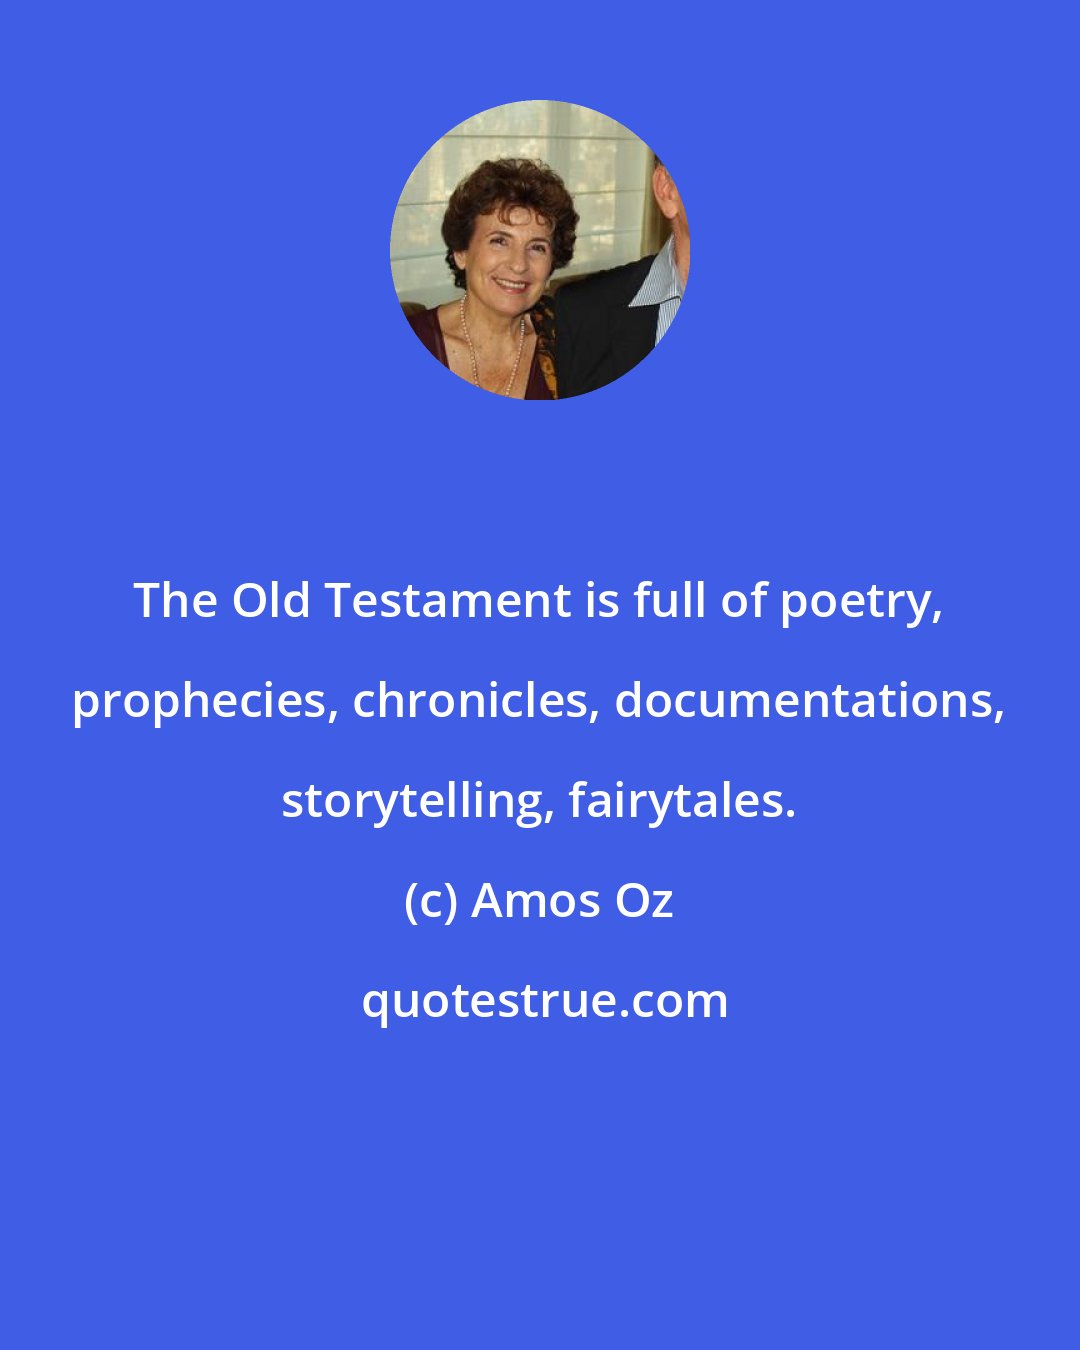 Amos Oz: The Old Testament is full of poetry, prophecies, chronicles, documentations, storytelling, fairytales.